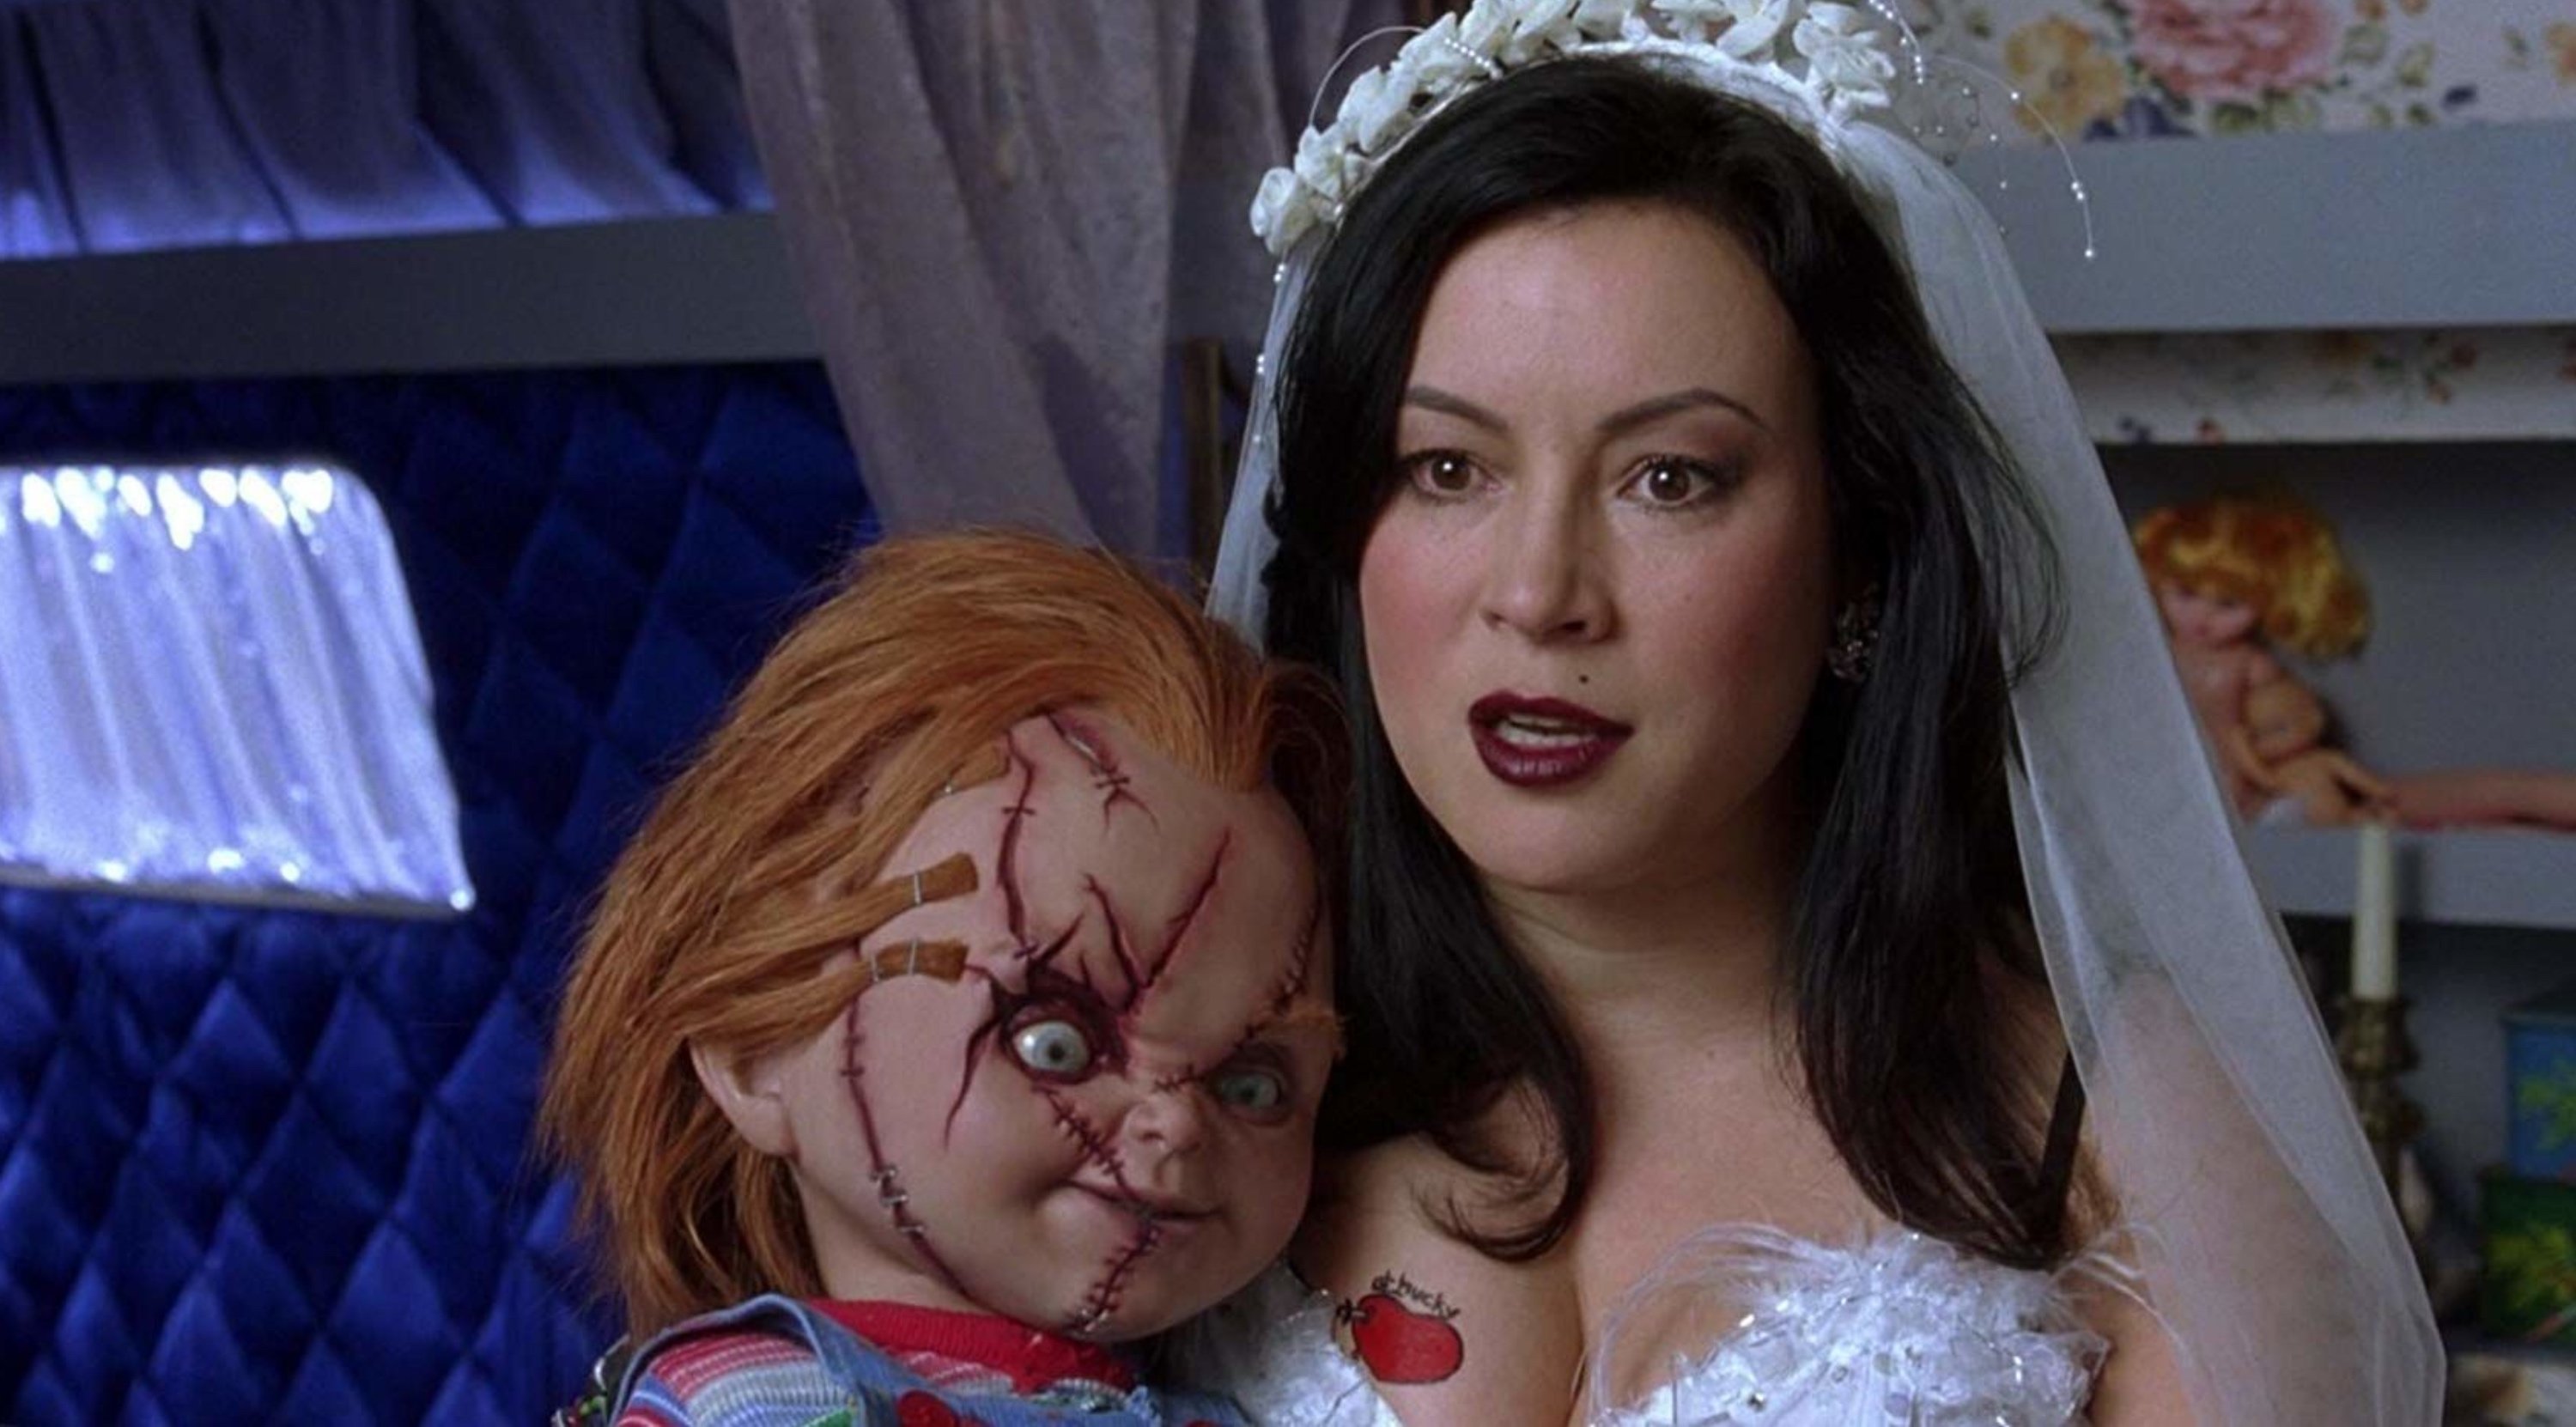 Chucky': Episode 5 Reveals How Charles Lee Ray Met Tiffany Valentine